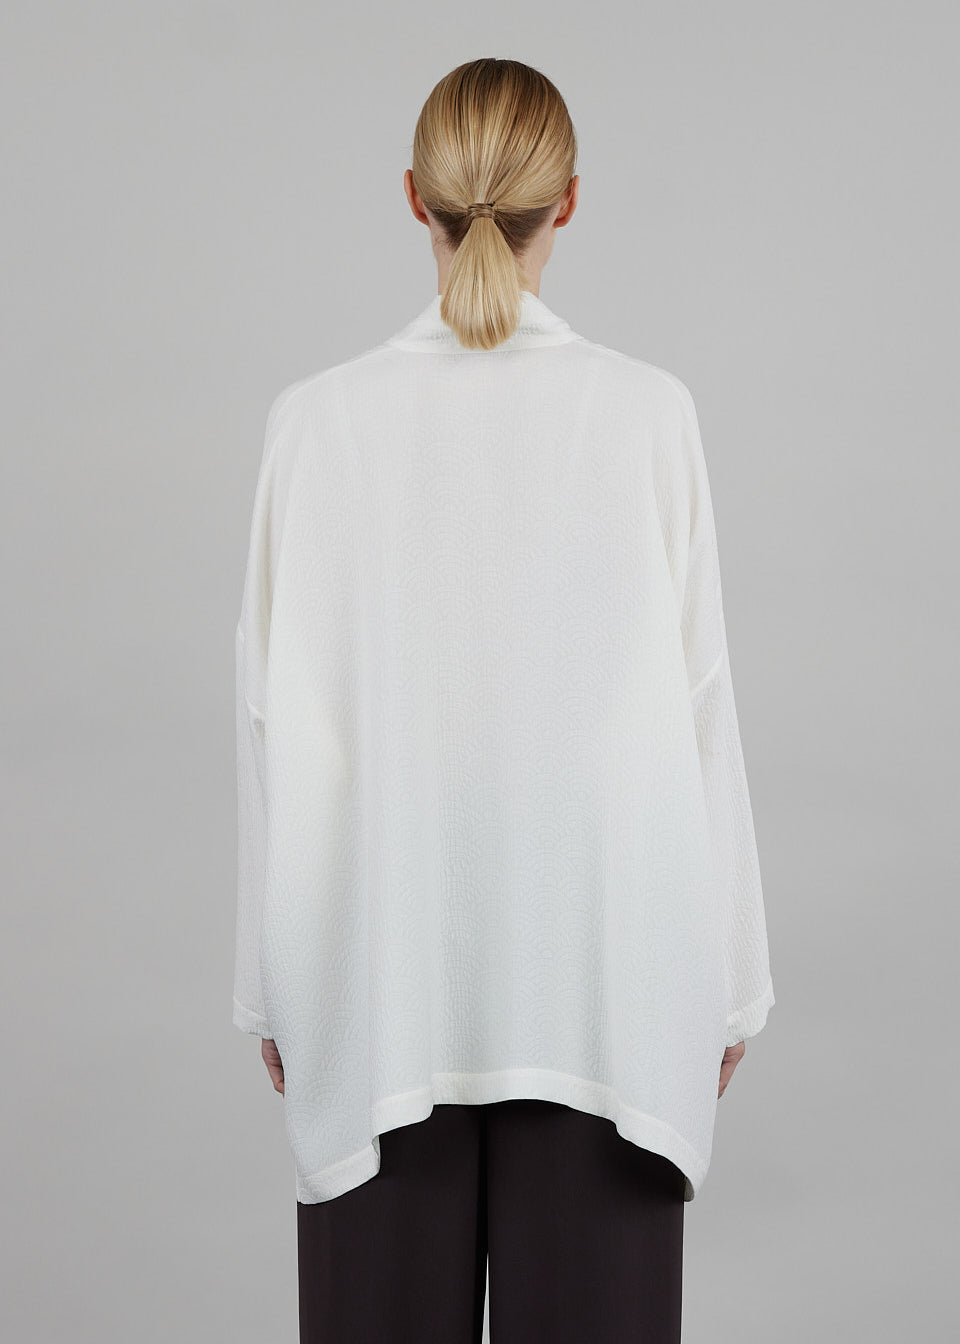 wide longer back double stand collar shirt - long